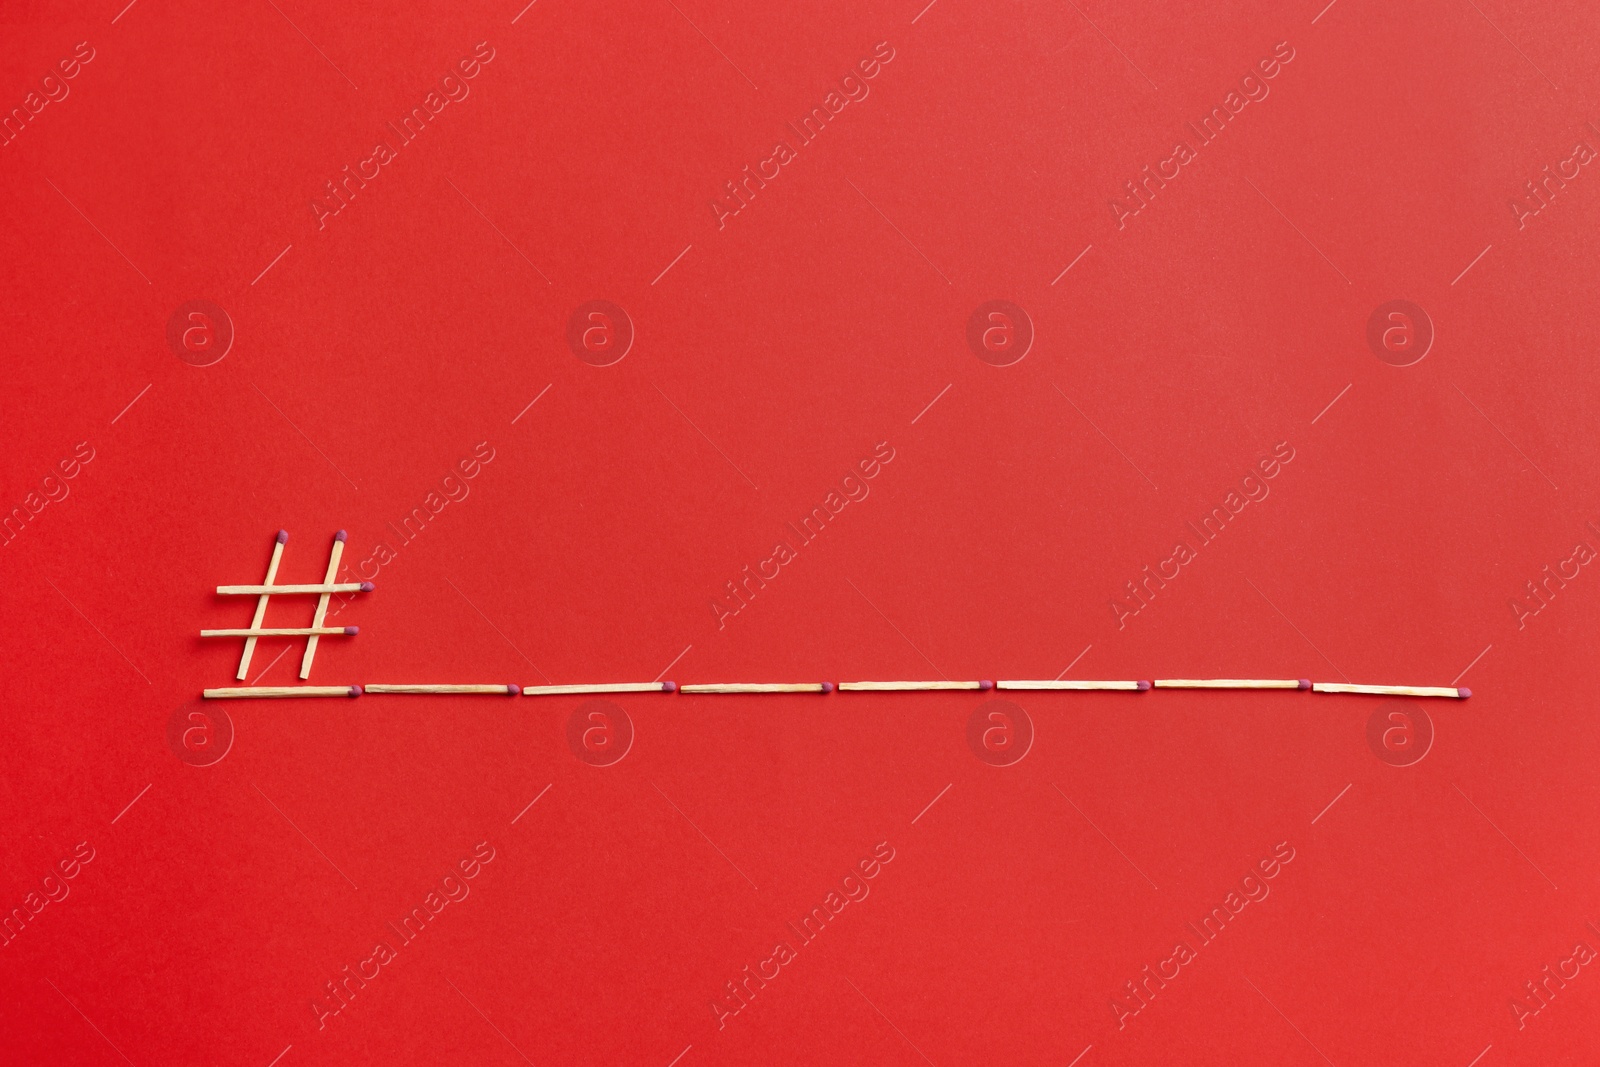 Photo of Hashtag symbol and space for text made of wooden matches on red background, flat lay